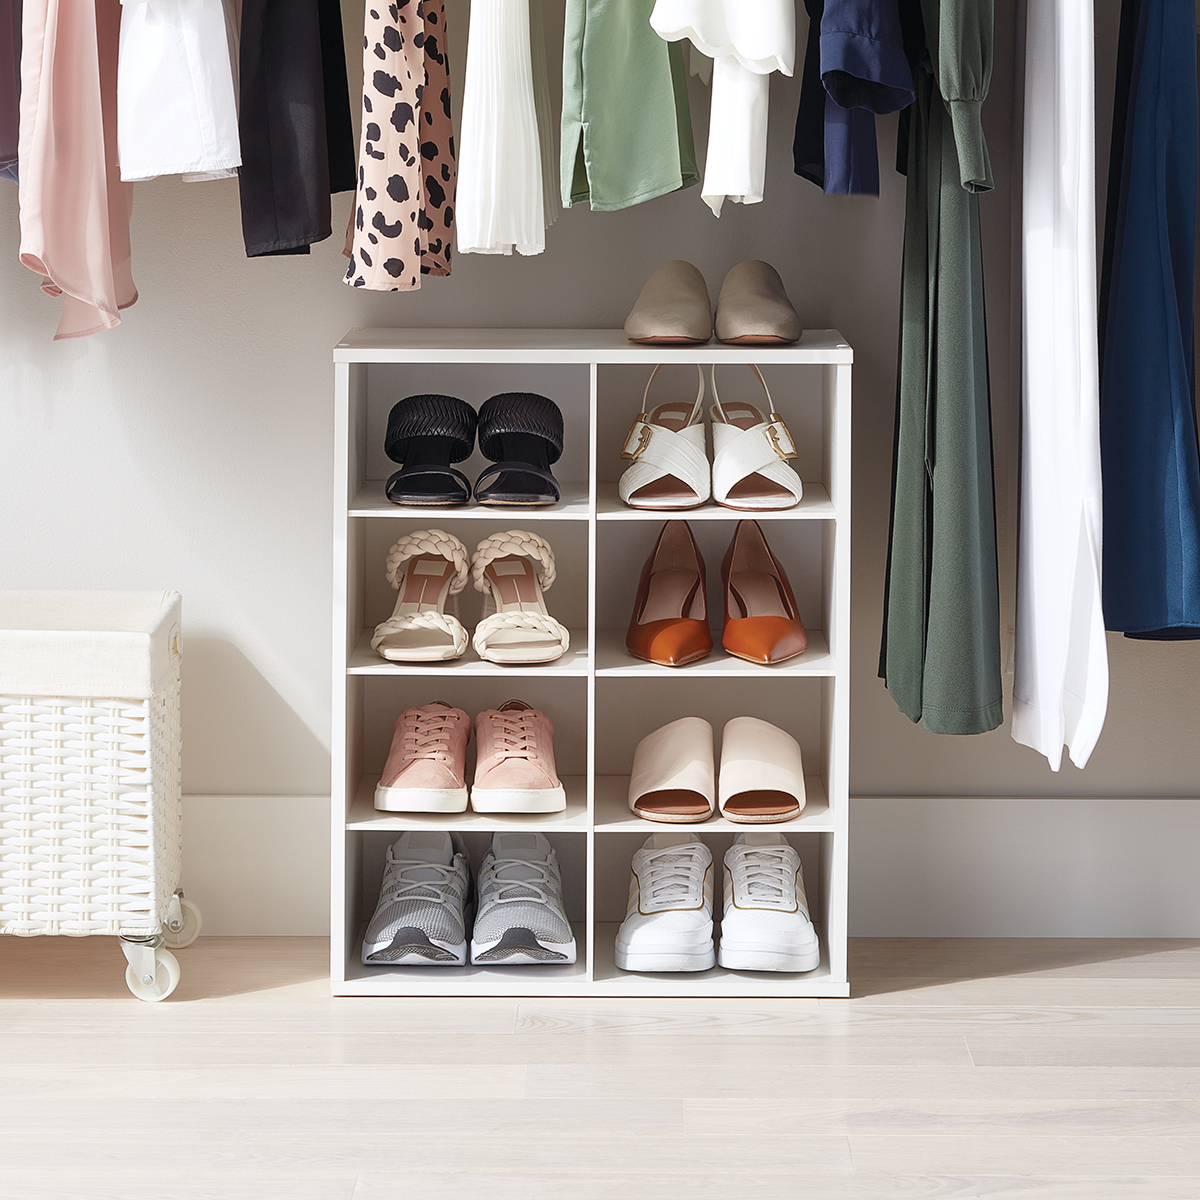 The Container Store 8-Pair Shoe Organizer | The Container Store